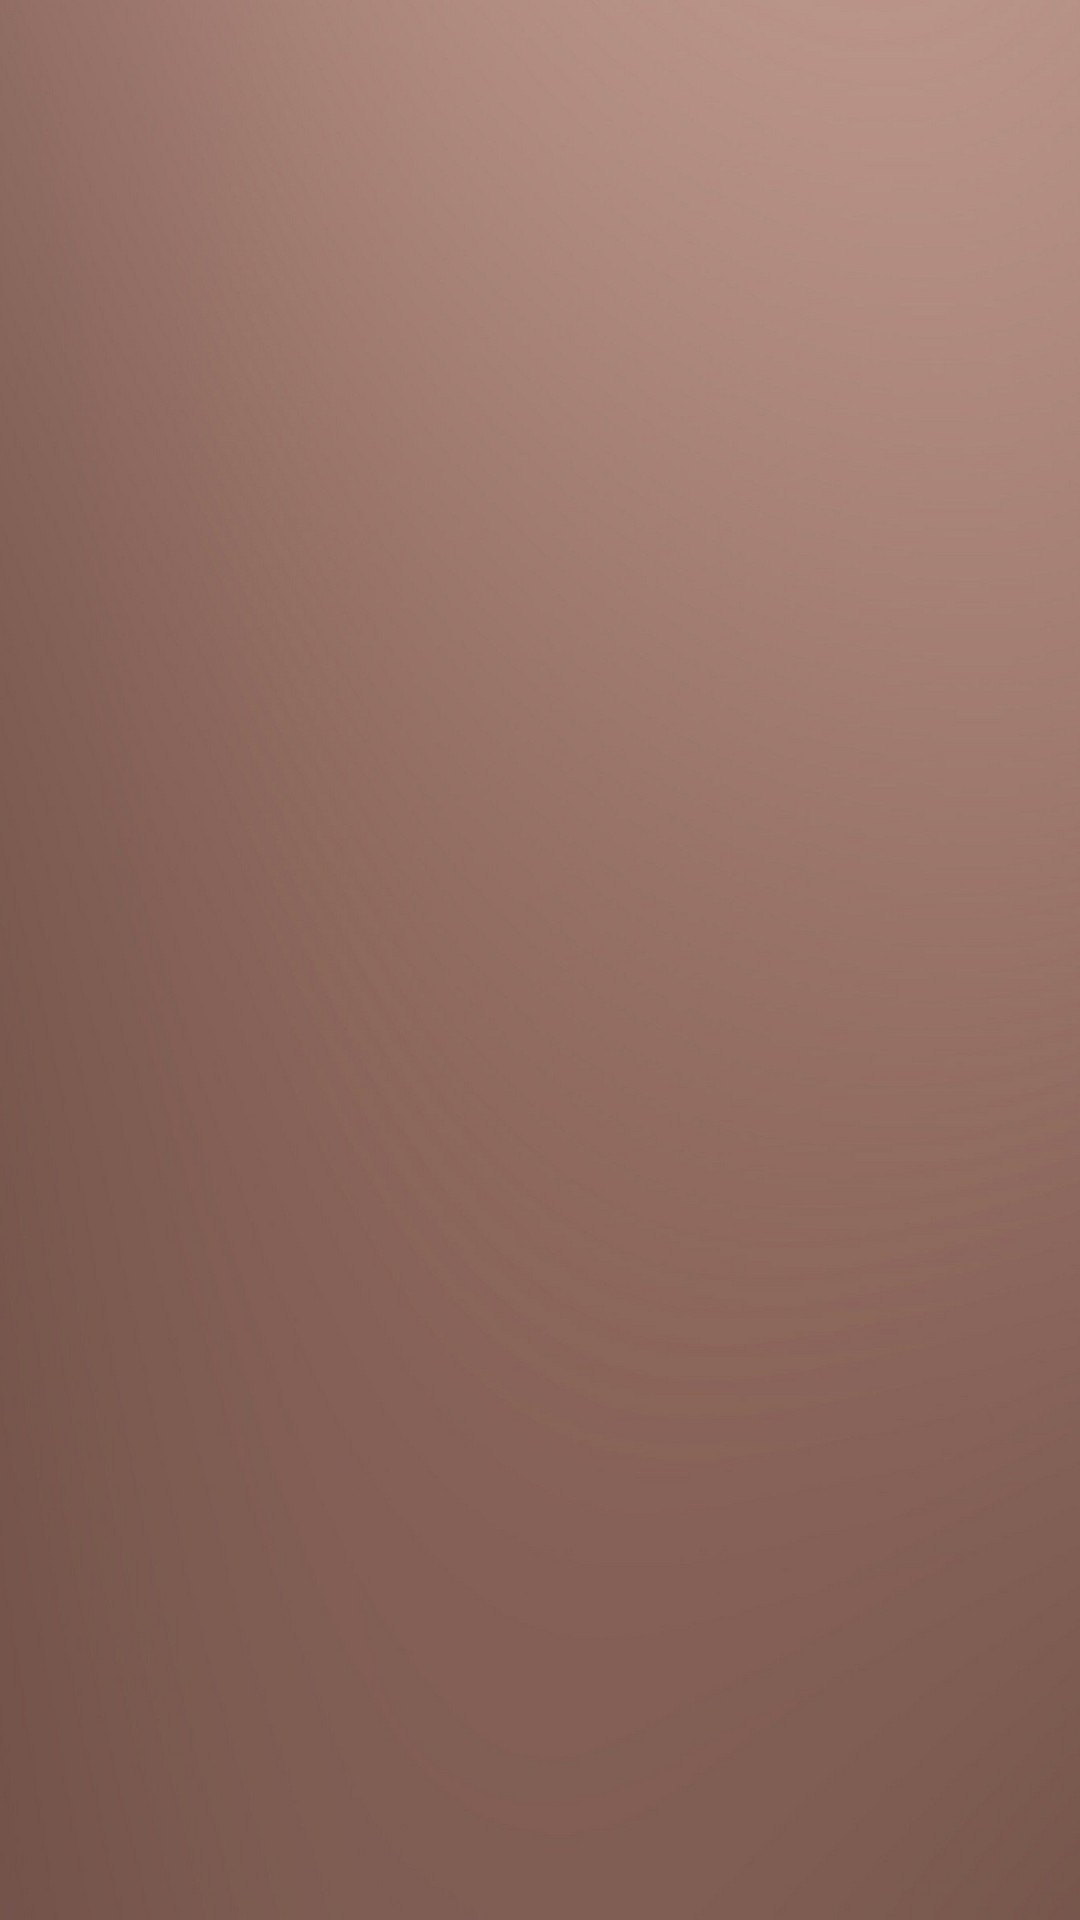 Metallic Rose Gold Wallpaper Android with HD resolution 1080x1920